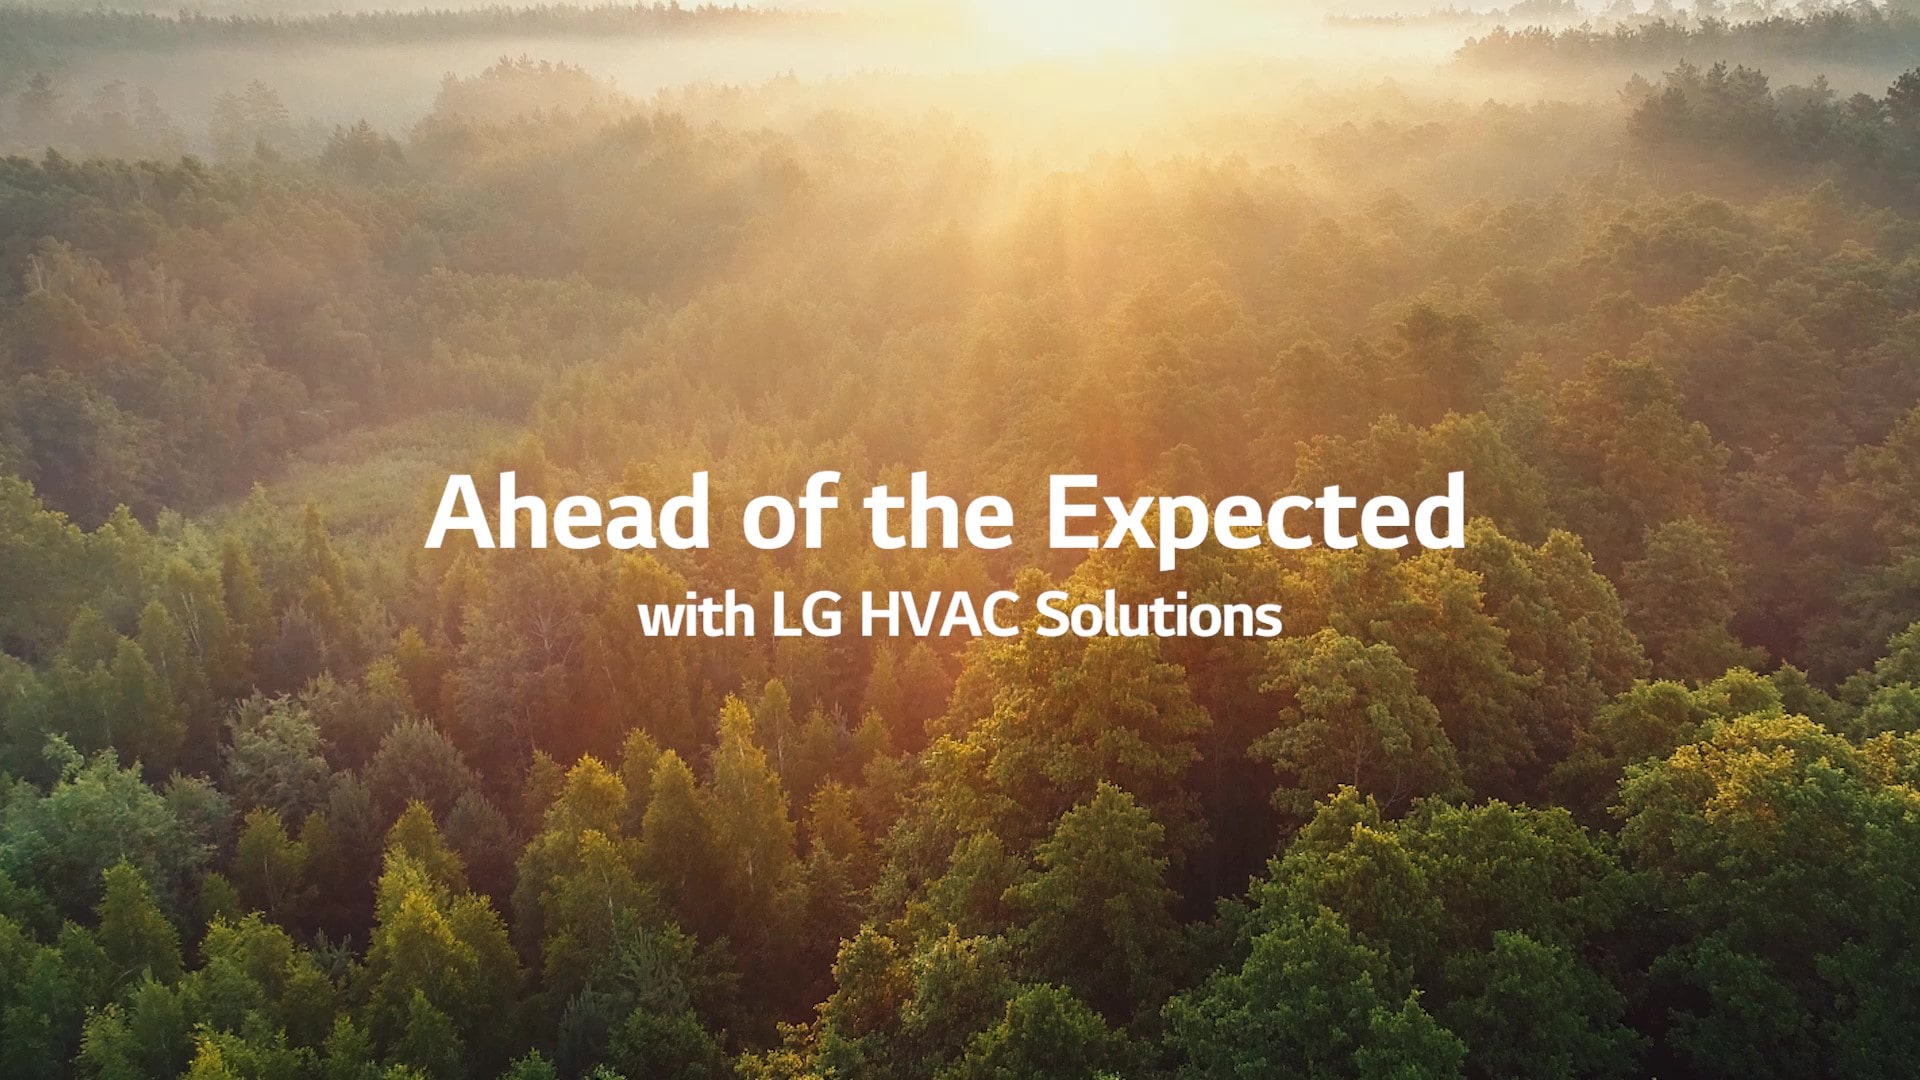 Imagem para "Ahead of the Expected with LG HVAC Solutions"